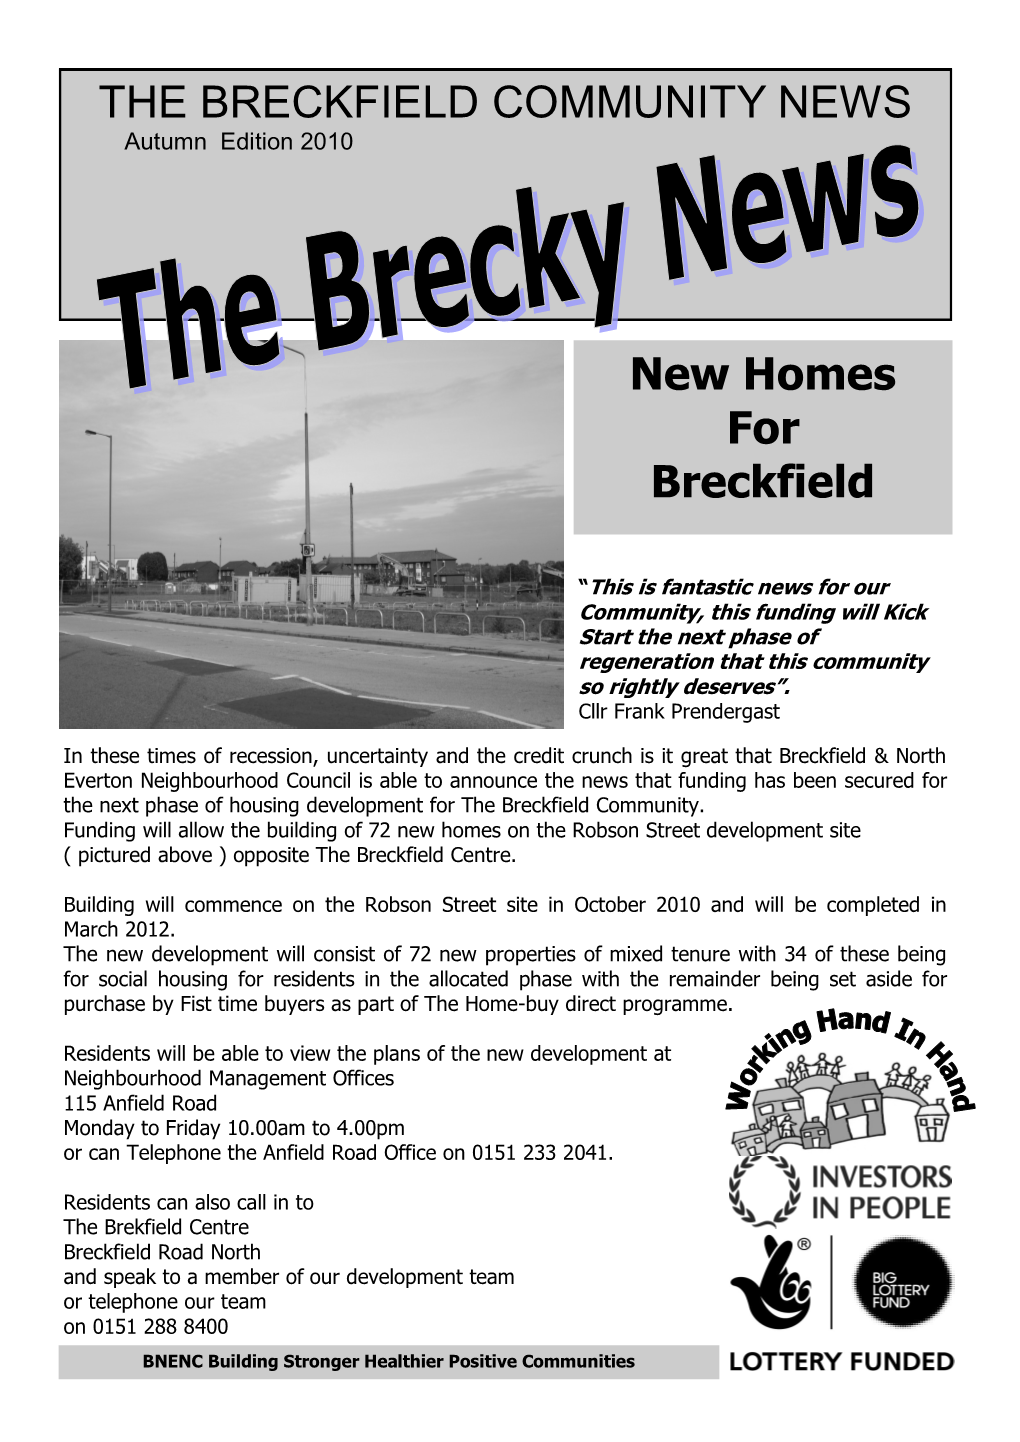 New Homes for Breckfield